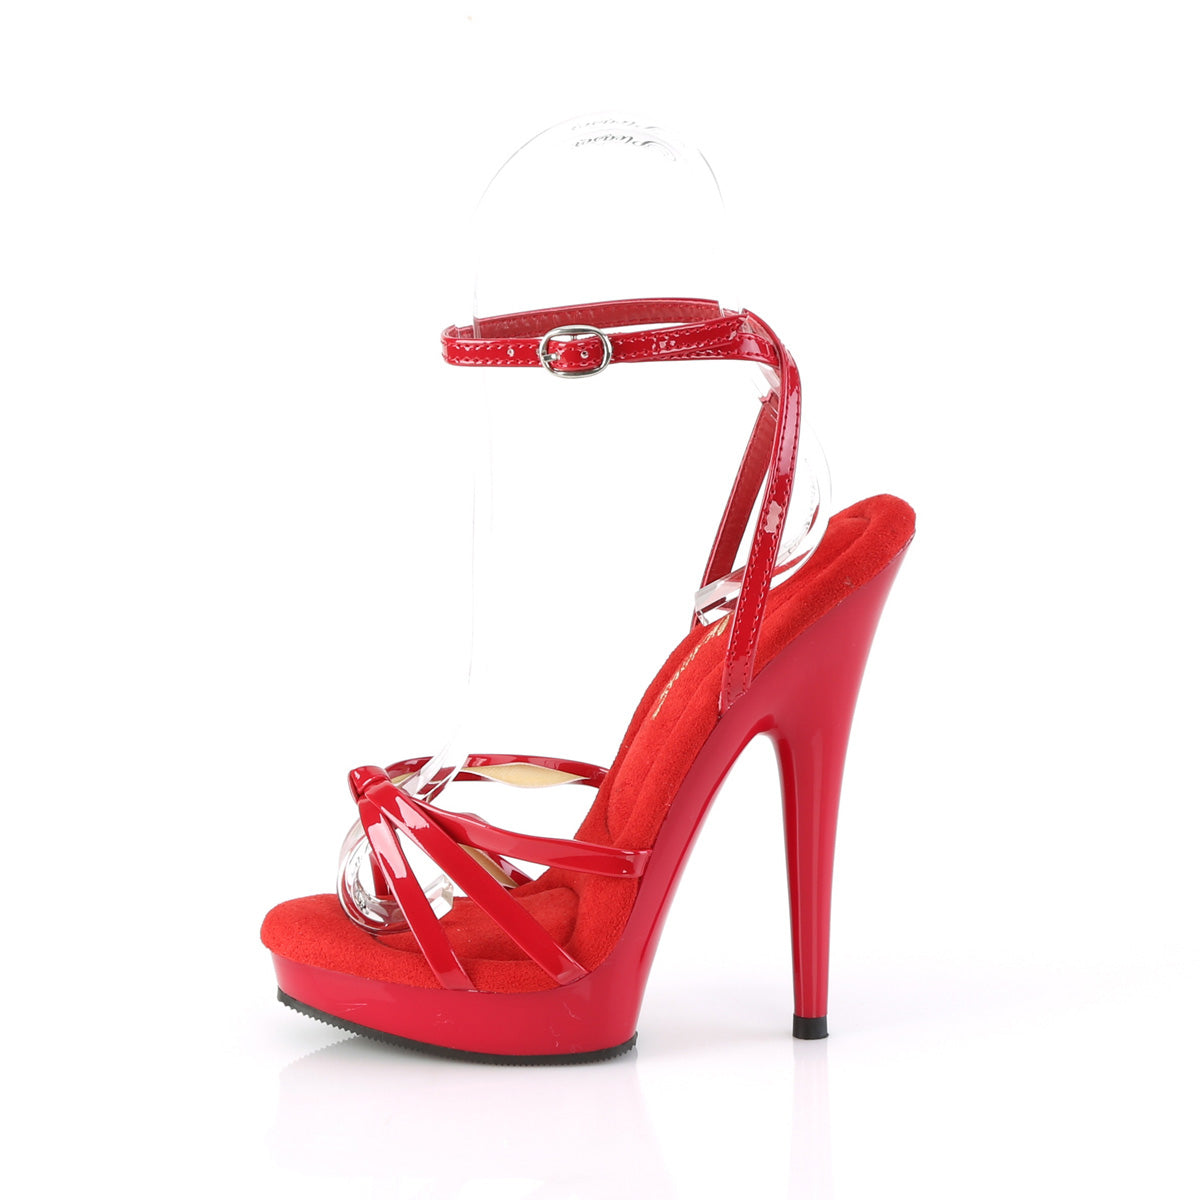 6 Inch Heel SULTRY-638 Red Patent